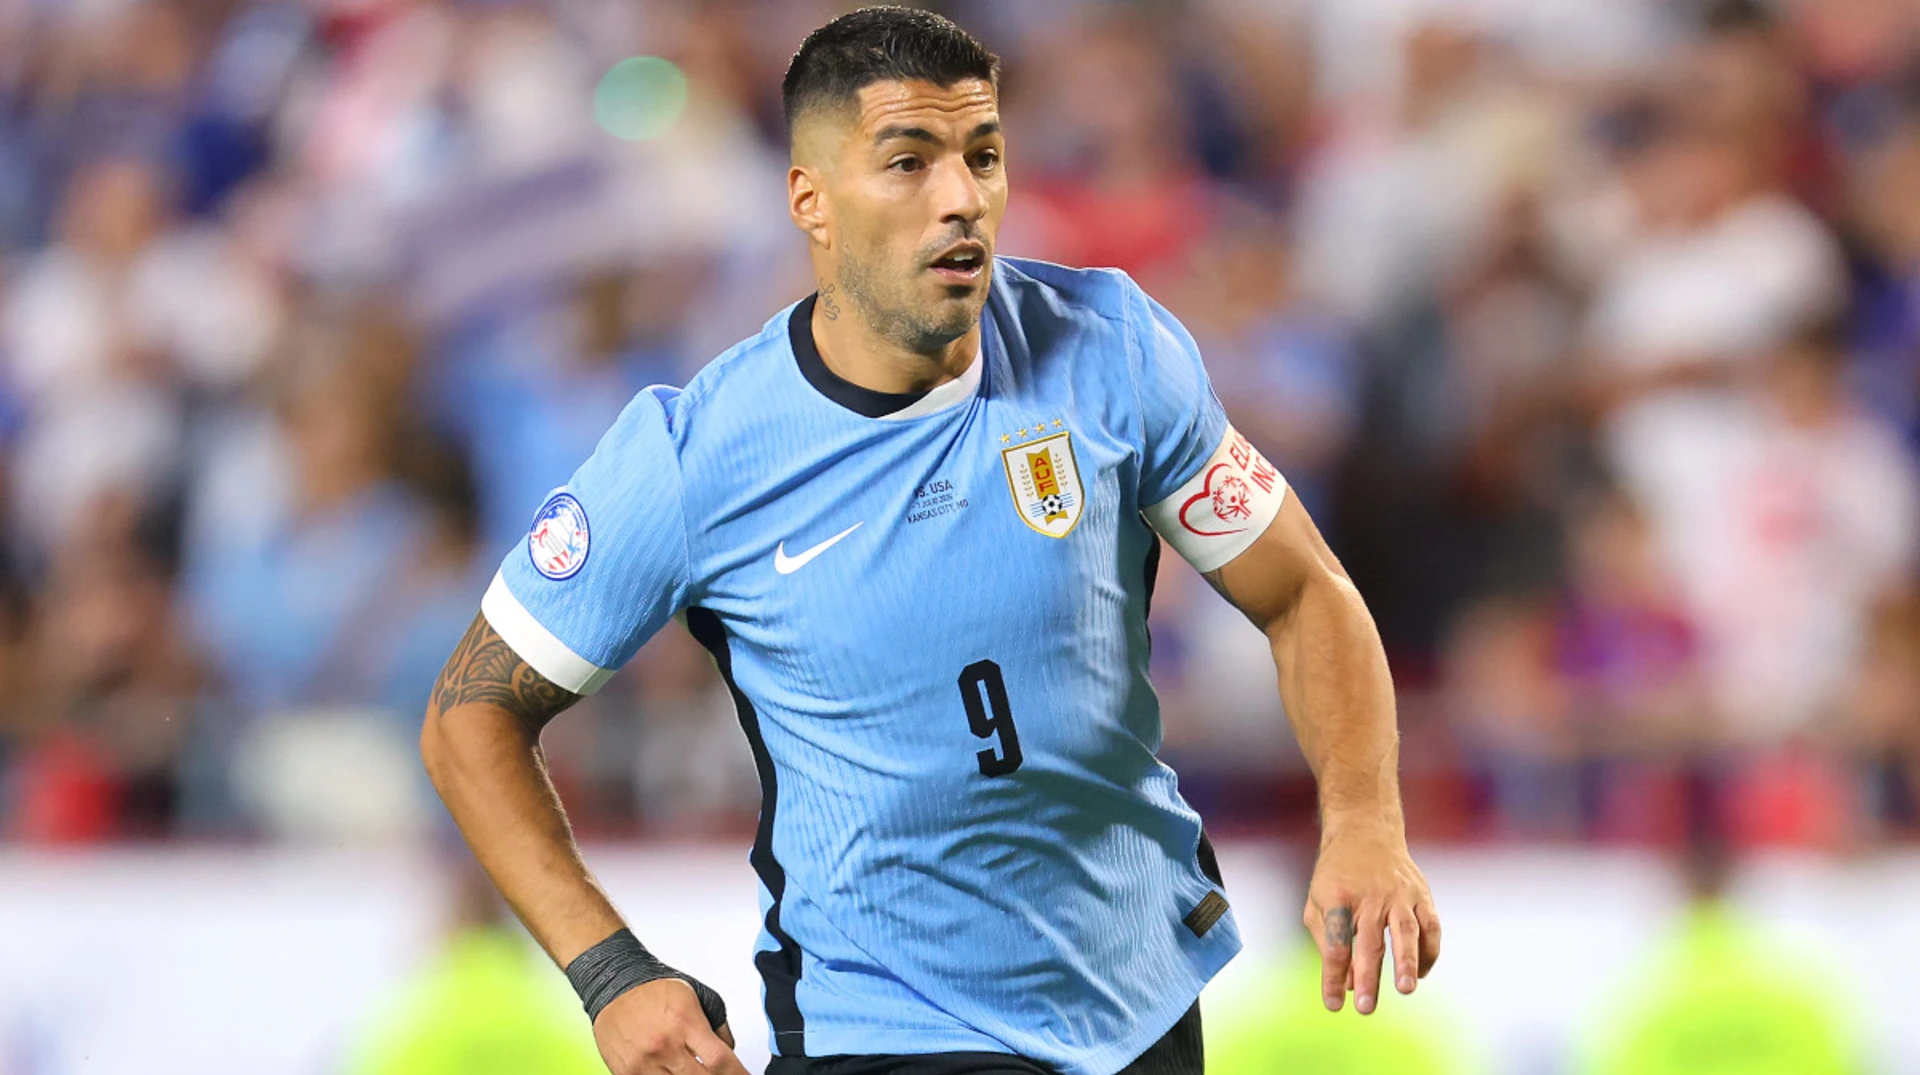 'The flame is dying out' says Uruguay's Suarez as retirement draws near